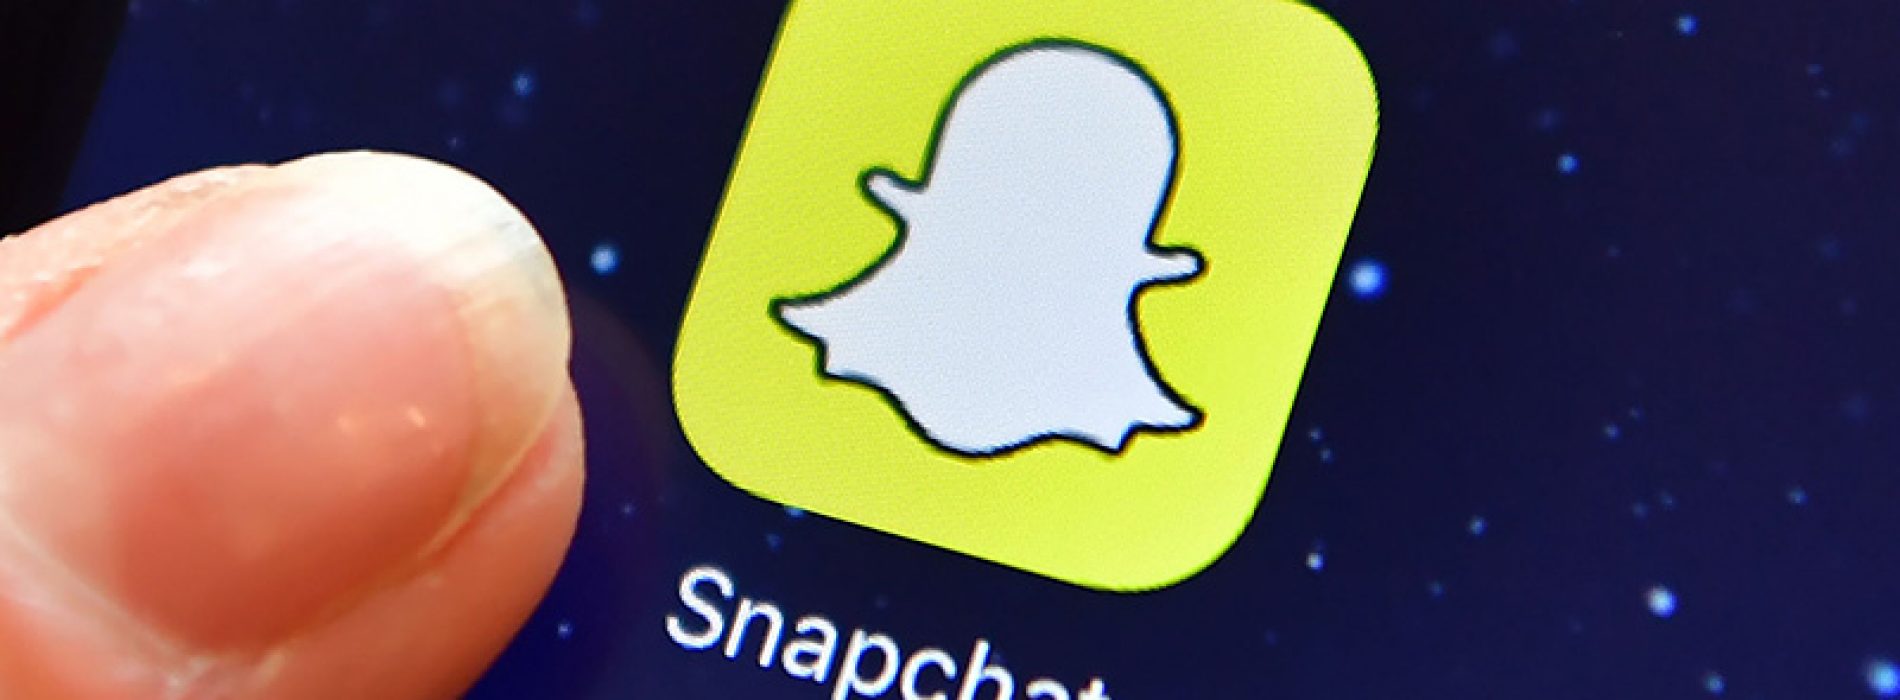 Method Options with Snapchat: Your Deals